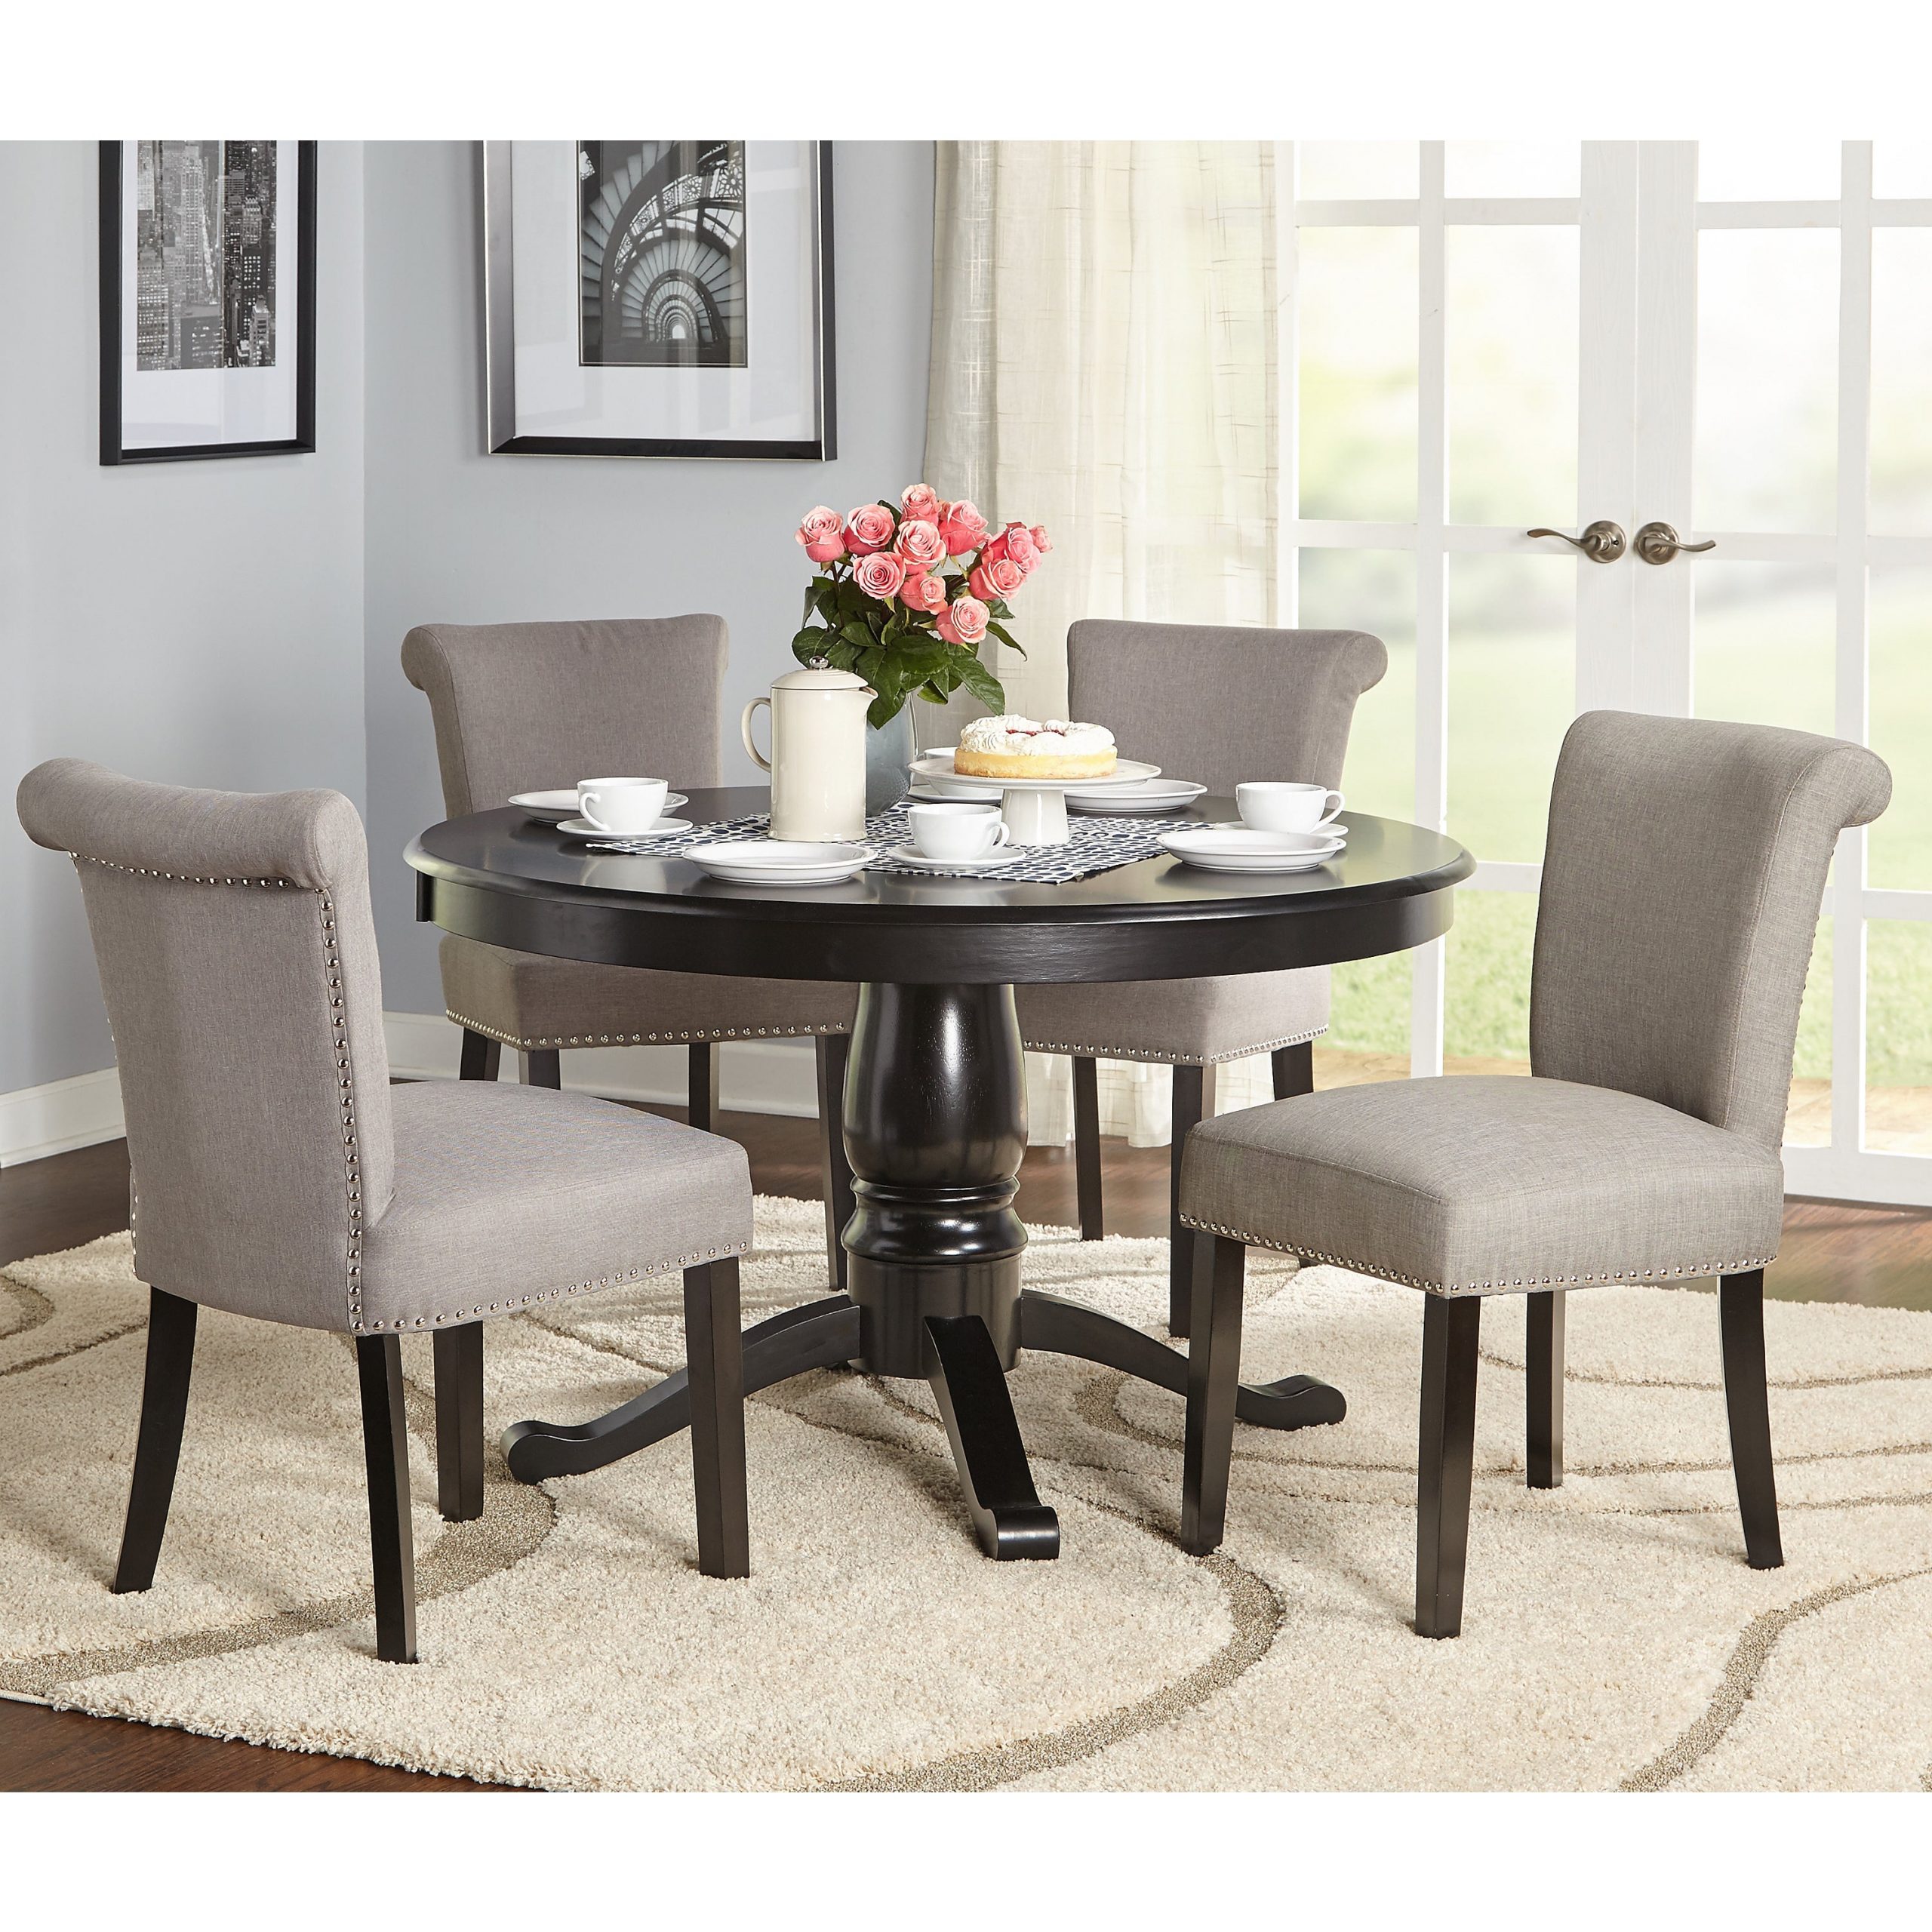 Dining Room Sets Under $300.00 • Faucet Ideas Site